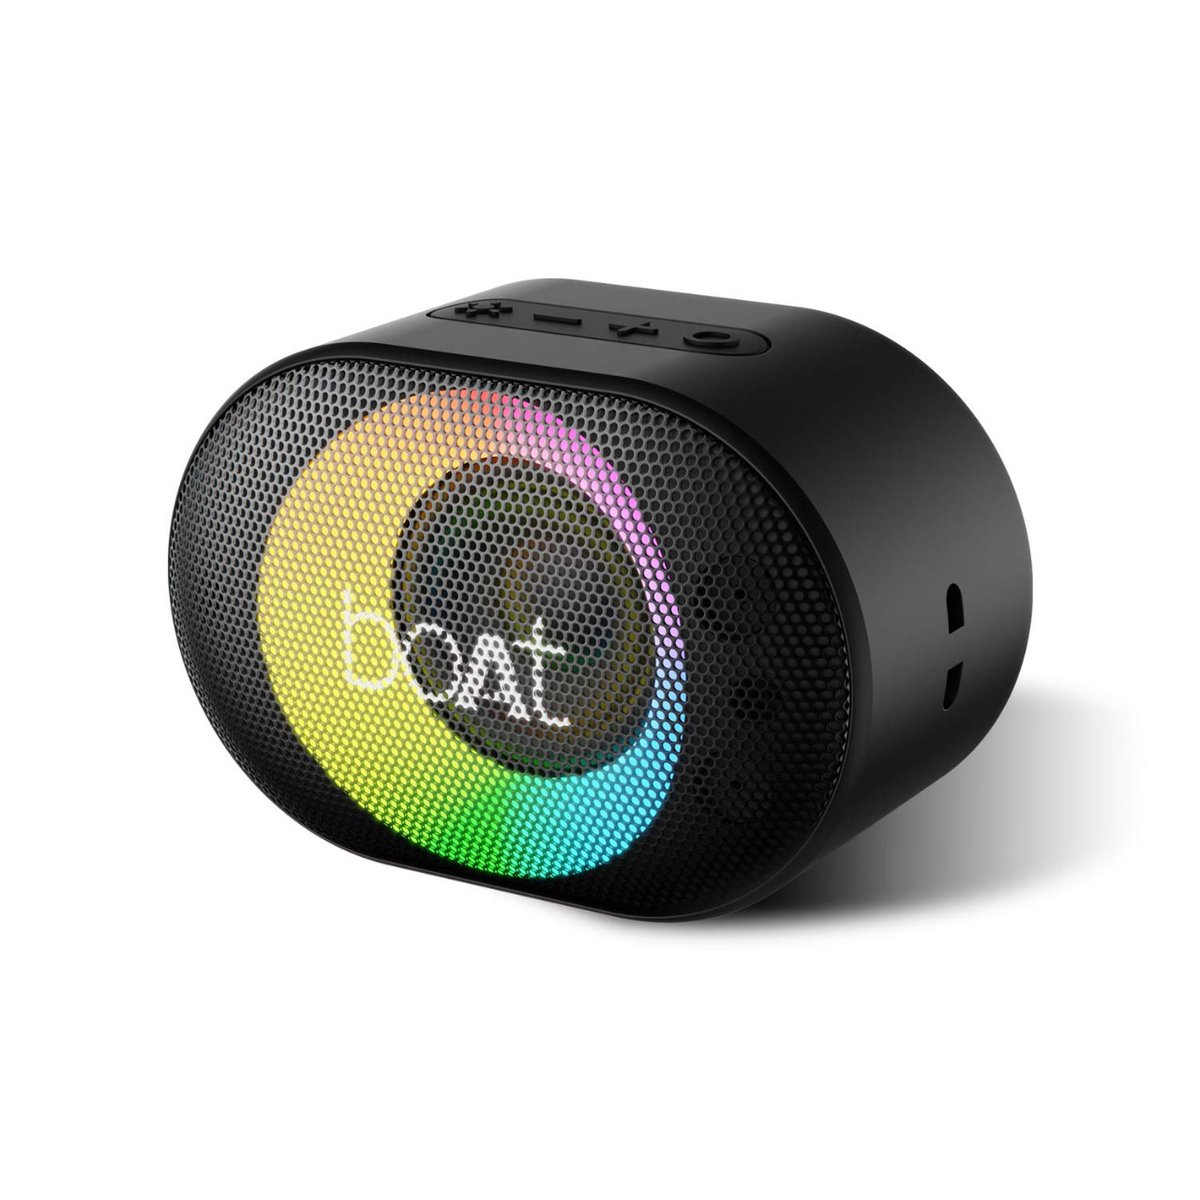 #FlashSale : Buy #boAt Stone 250 5W Bluetooth #Speaker (Black) at Rs.1,199/-. #Offer valid till 7th June.

#ShopNow : amzn.to/3uY6Ng4

#dealoftheday #dealfinder #dealhunter #deals #amazon #amazondeals #india #amazonfinds #flashdeal #electronics #buynow #electronicsstore